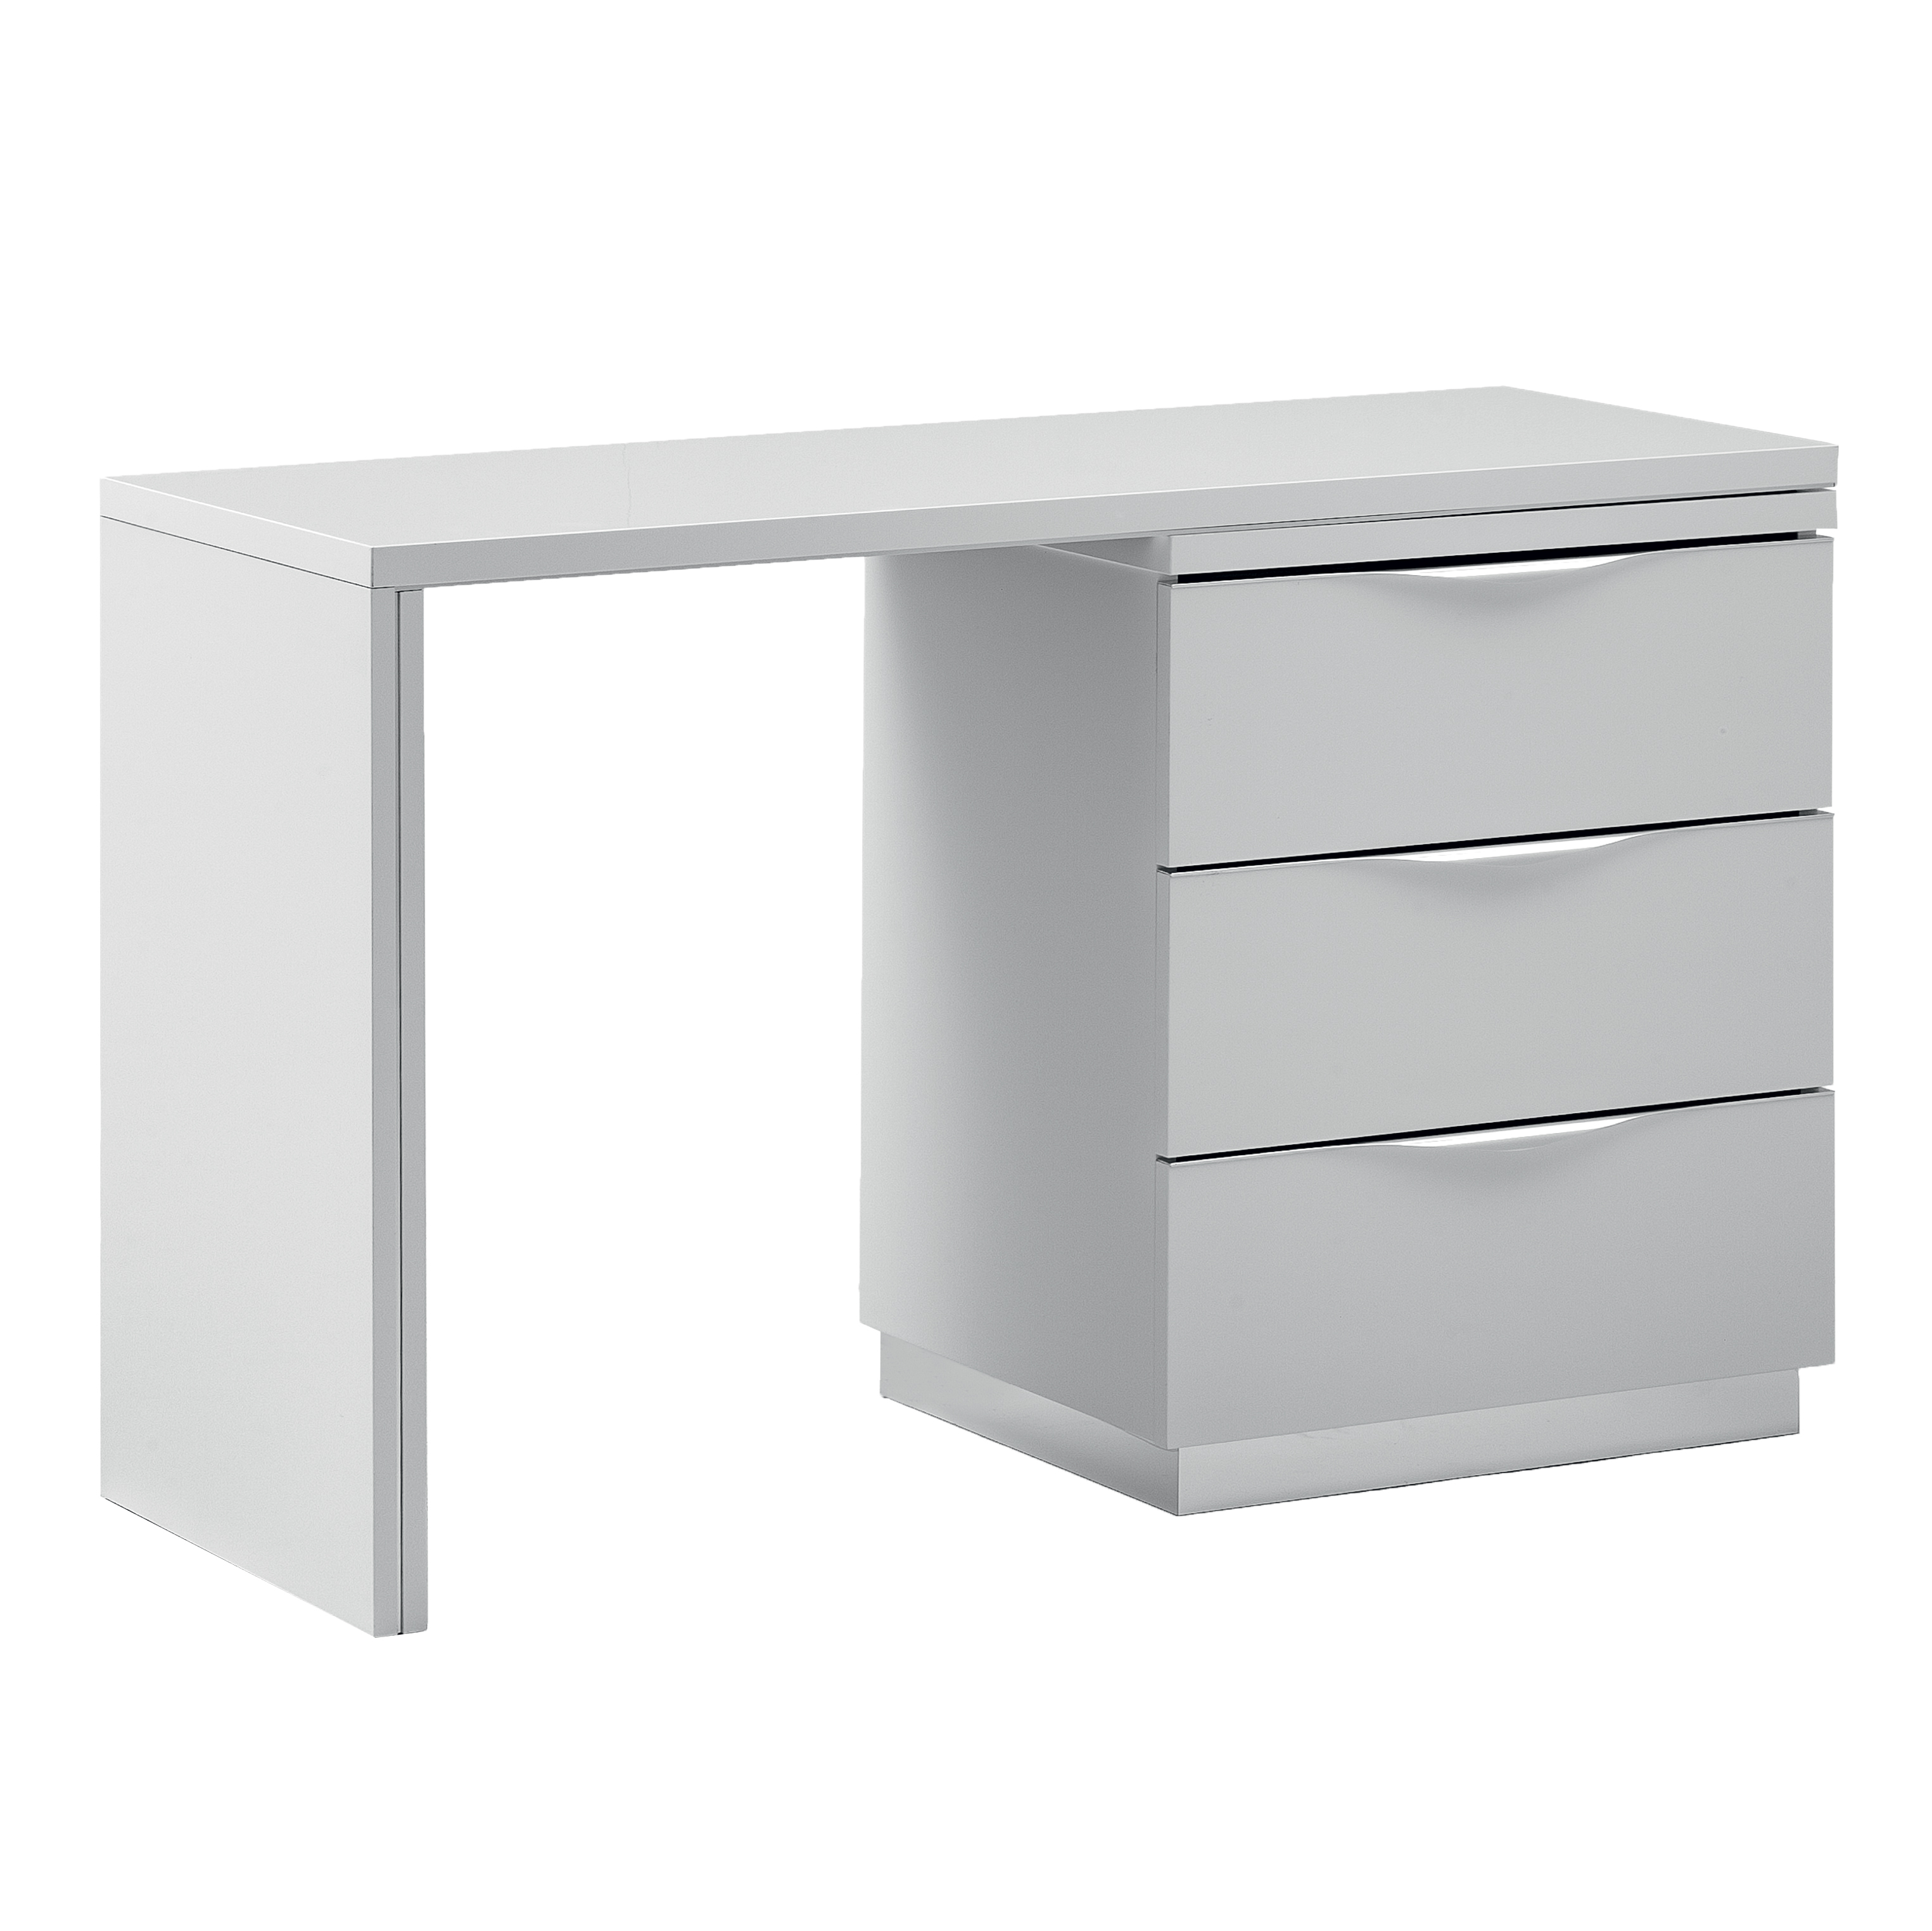 TOILETTE-WITH-DRAWERS-136TOI